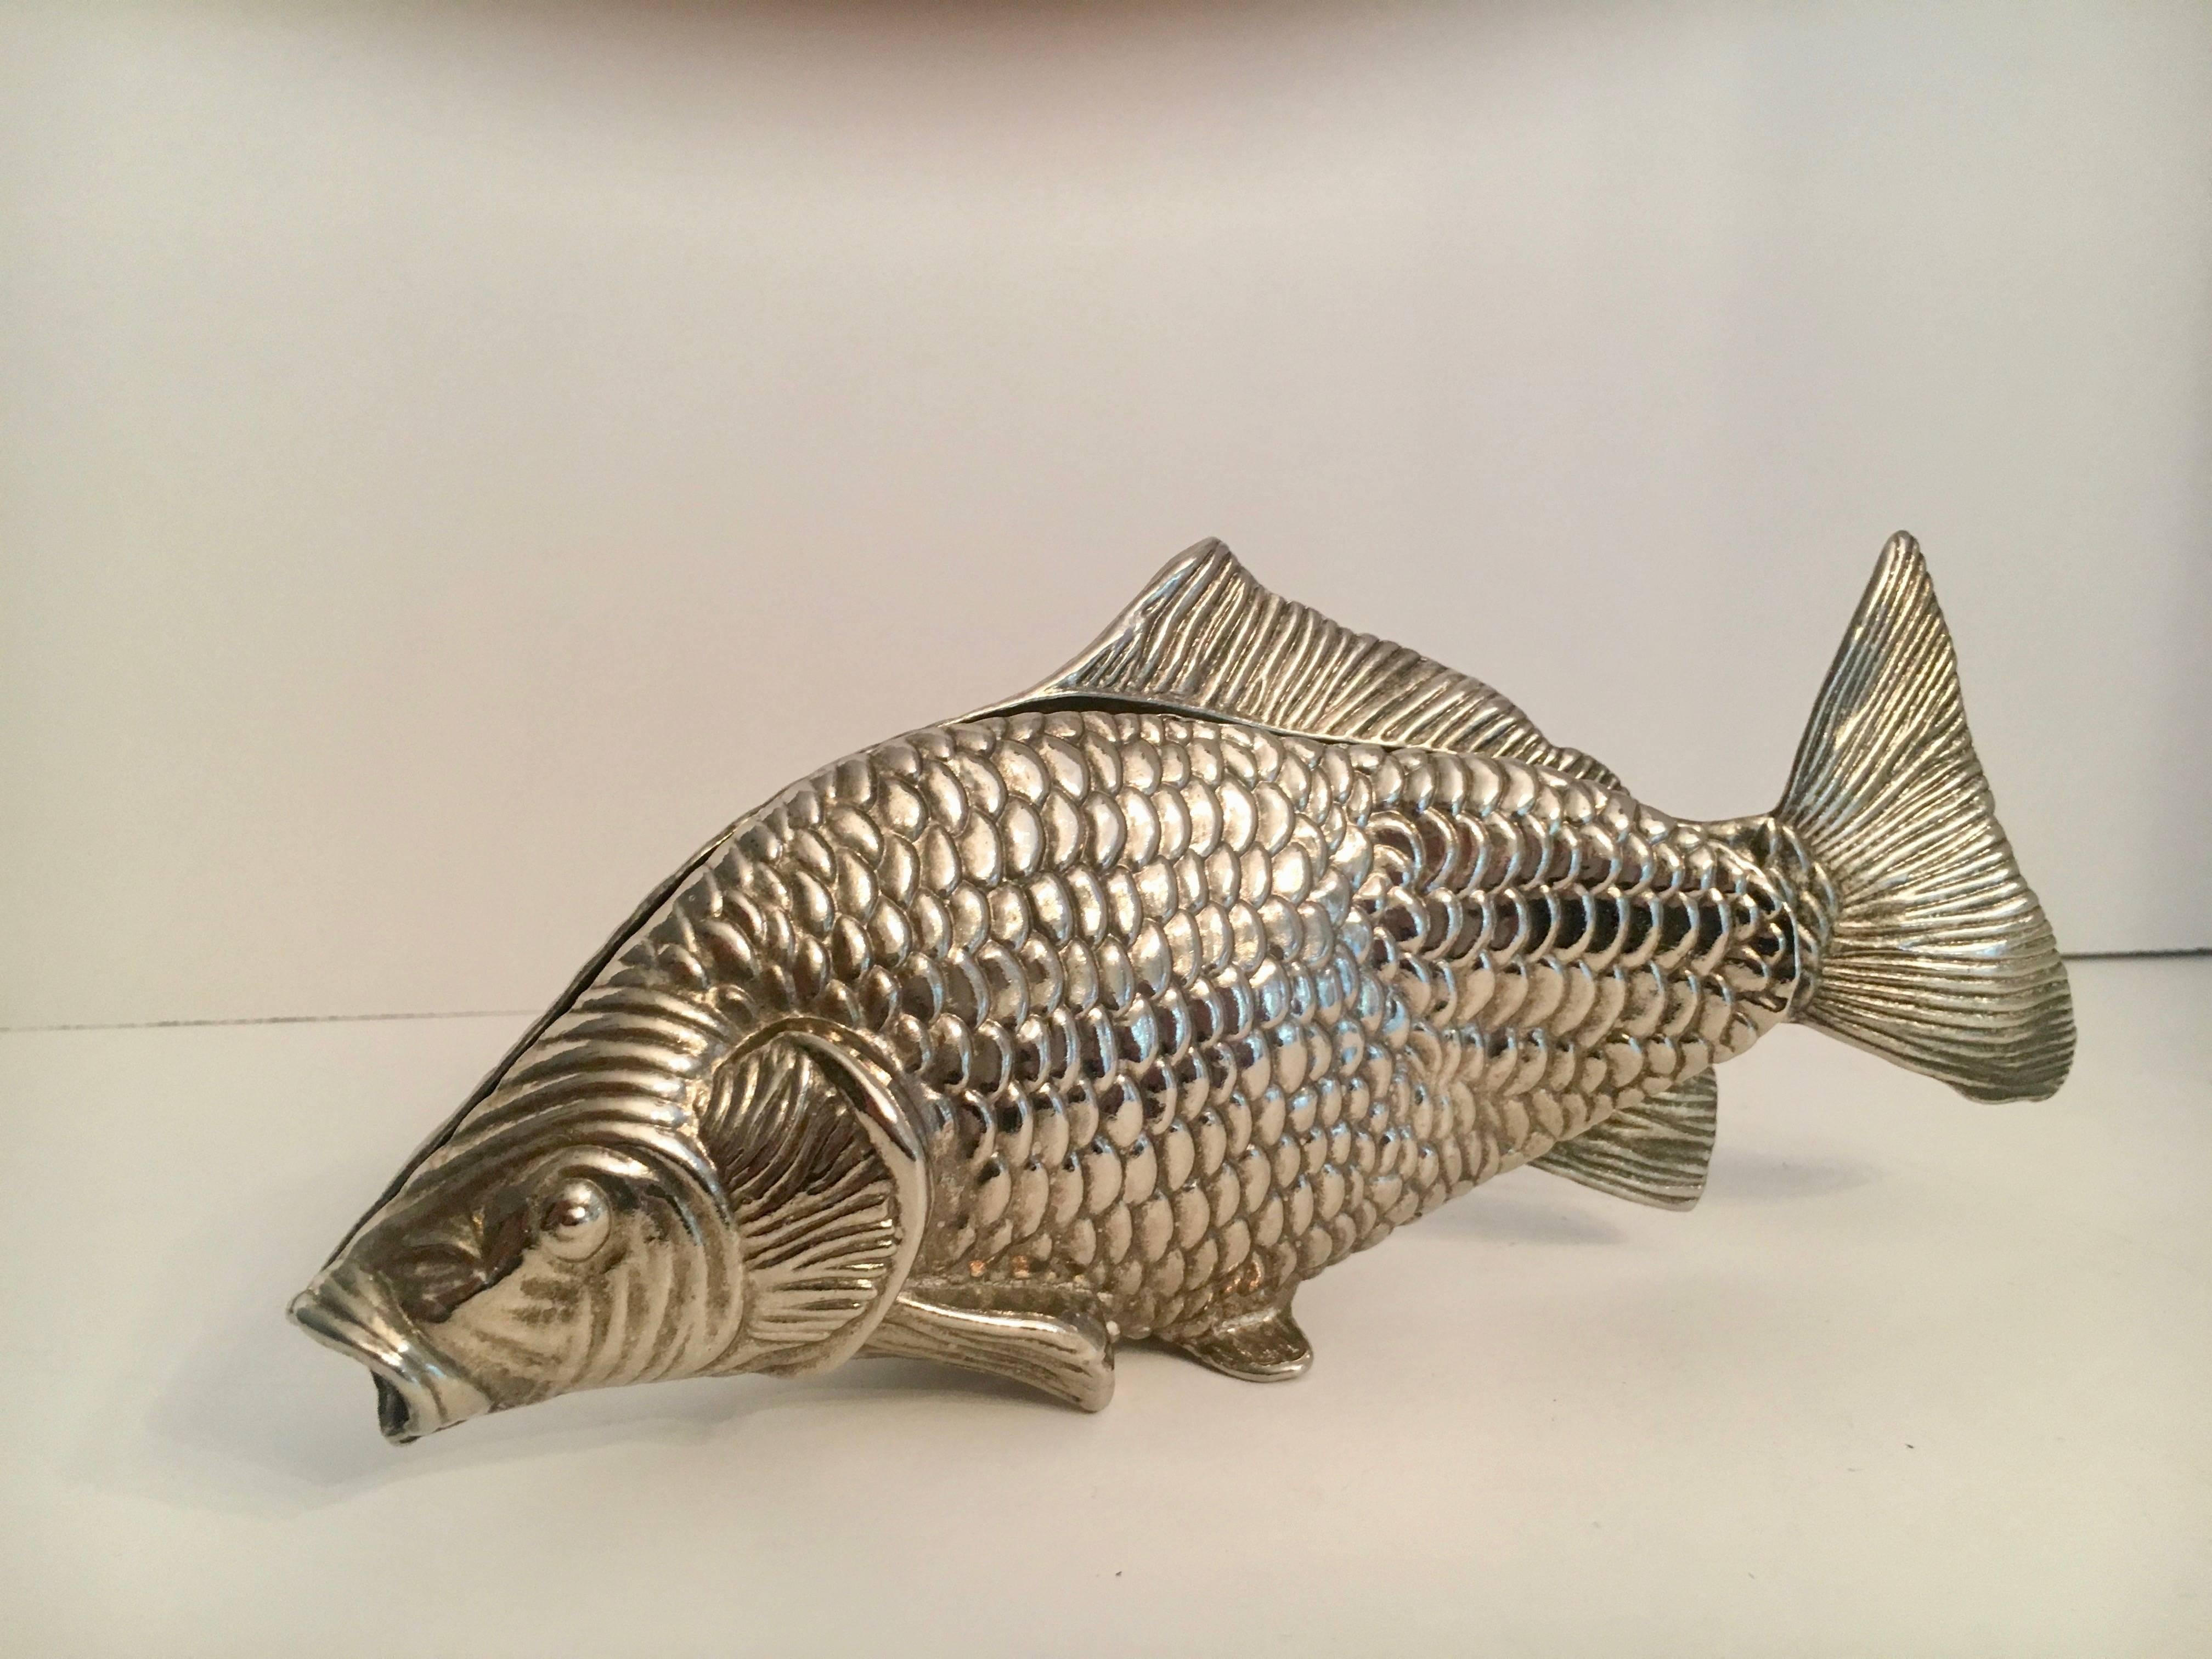 Silver Fish Letter Holder - For the sportsman or fisherman's desk or office a great silver piece that holds letters or pieces of art... perhaps art work for dad!?  Fathers day gifts!